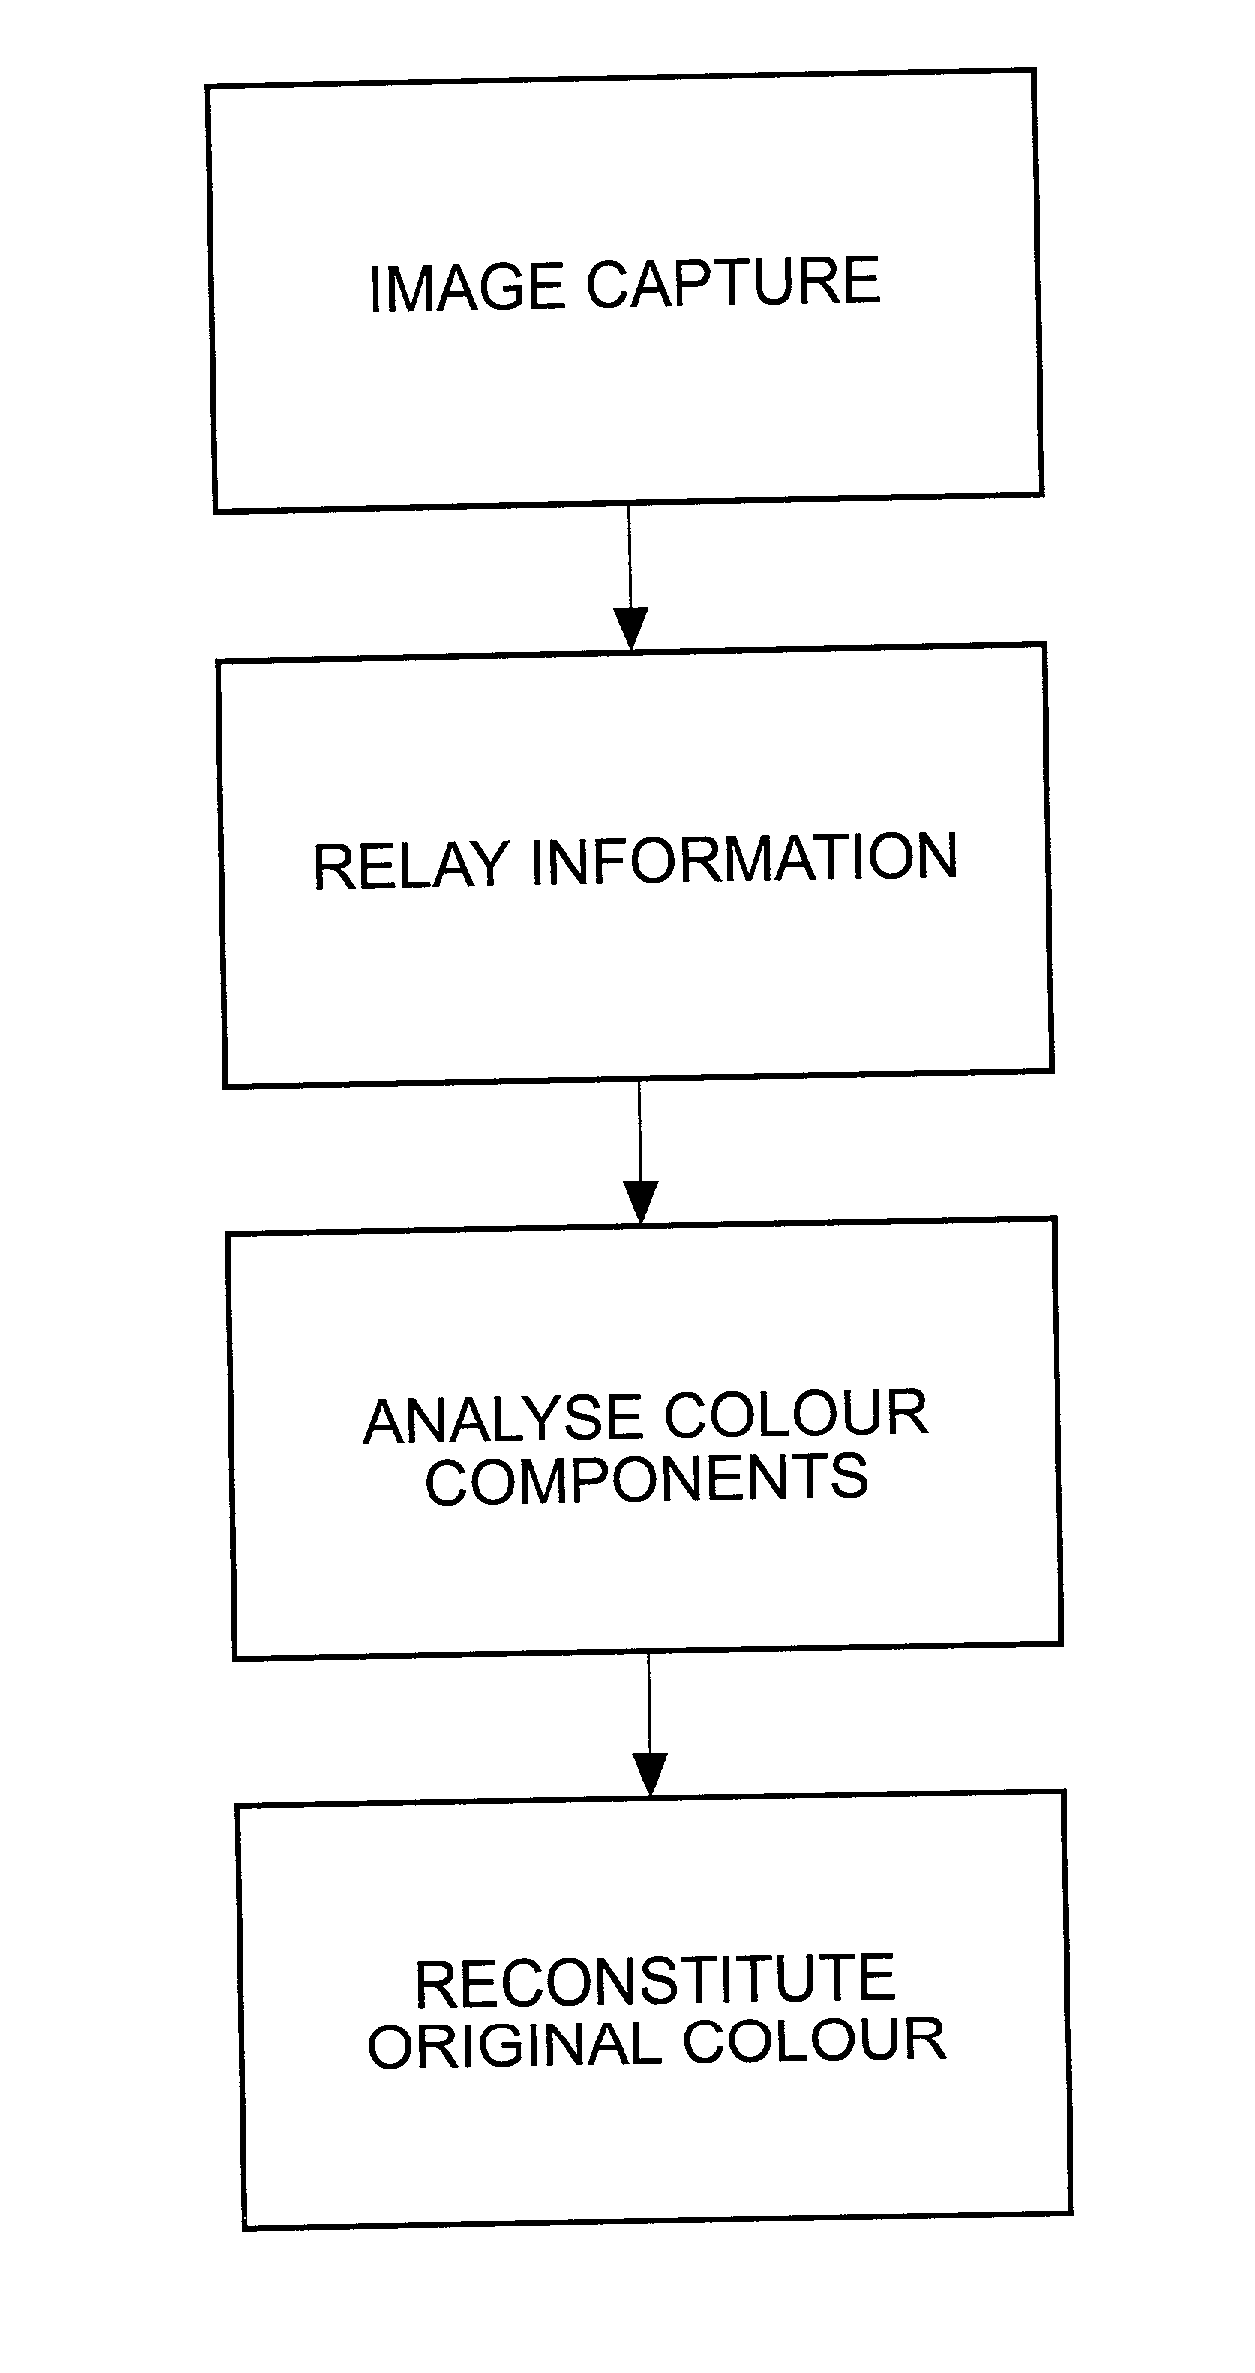 Colour matching system